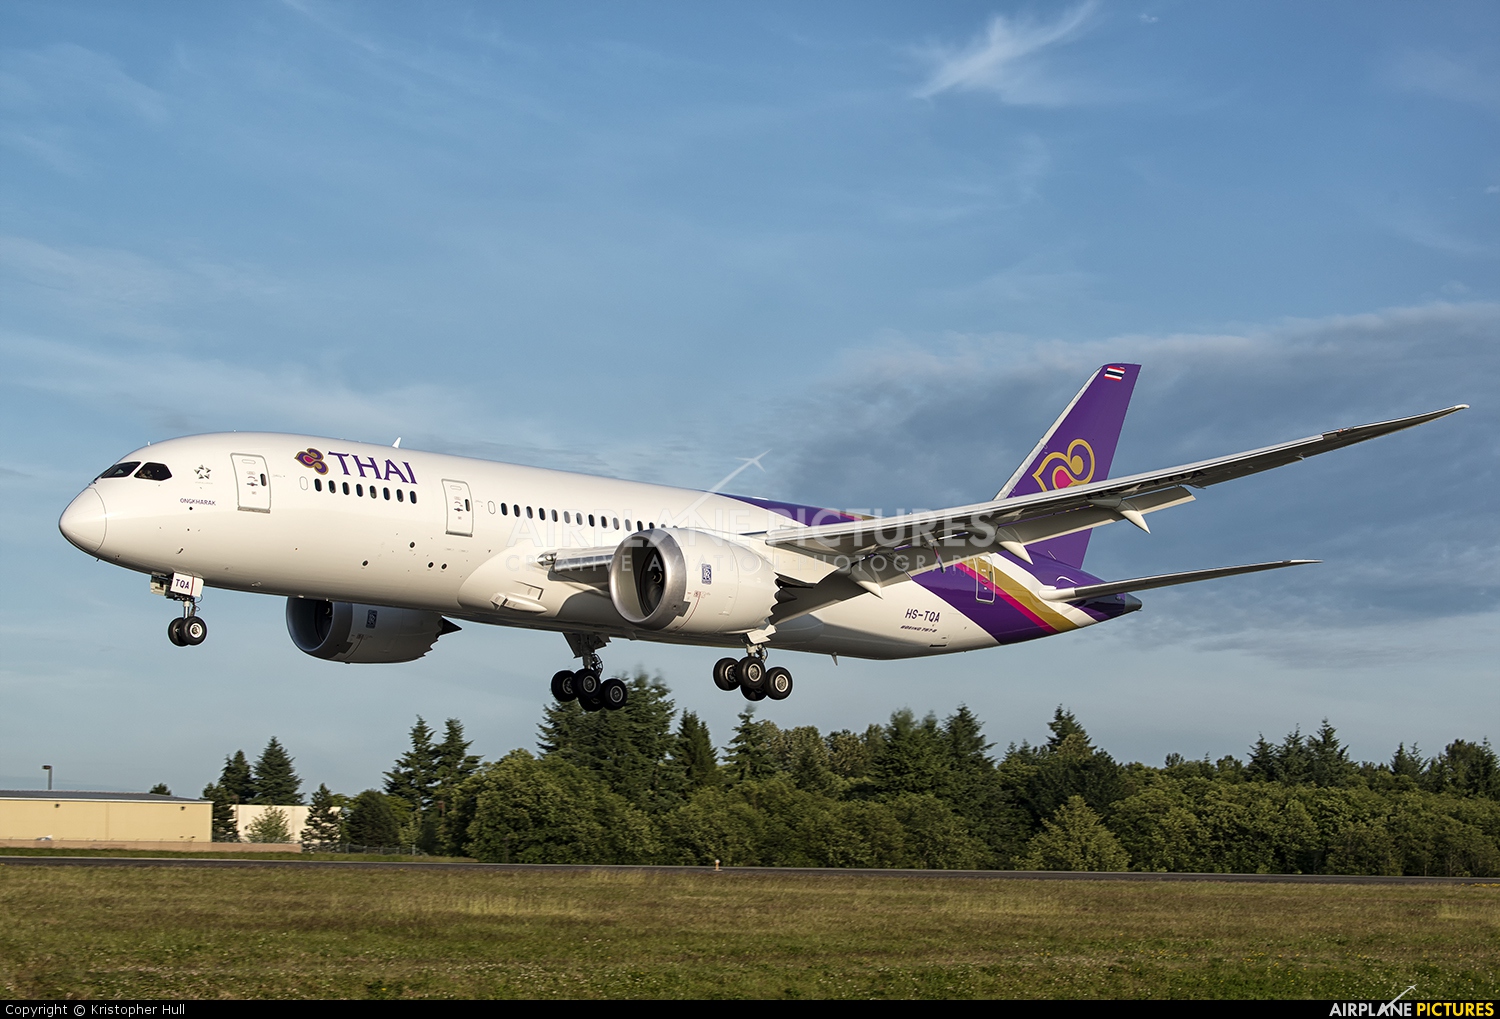 Thai Airways HS-TQA aircraft at Everett - Snohomish County / Paine Field